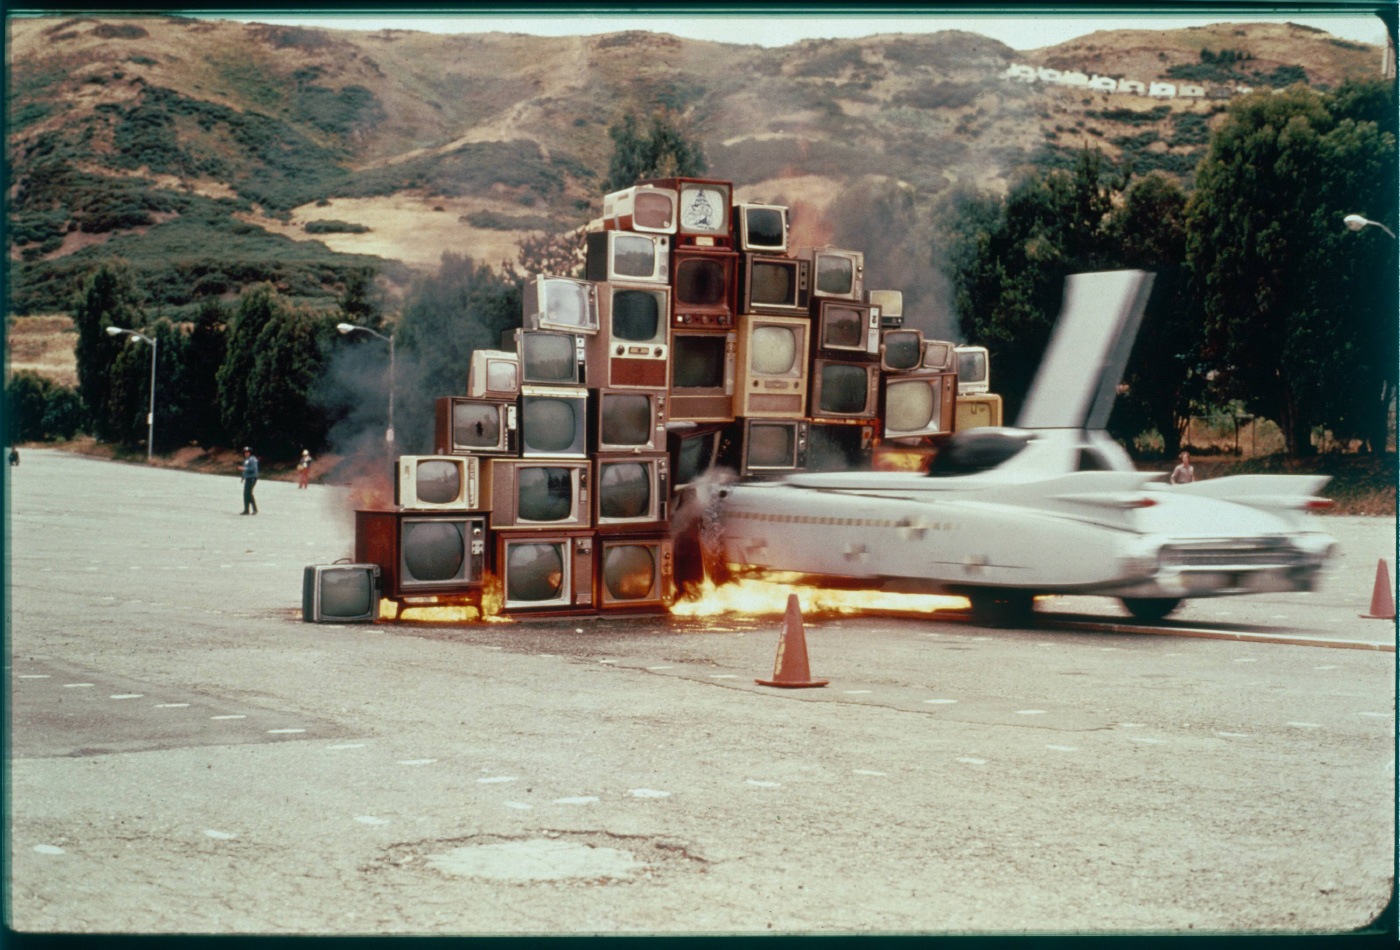 A car driving into a wall of television sets, from Ant Farm, on display at ADFF